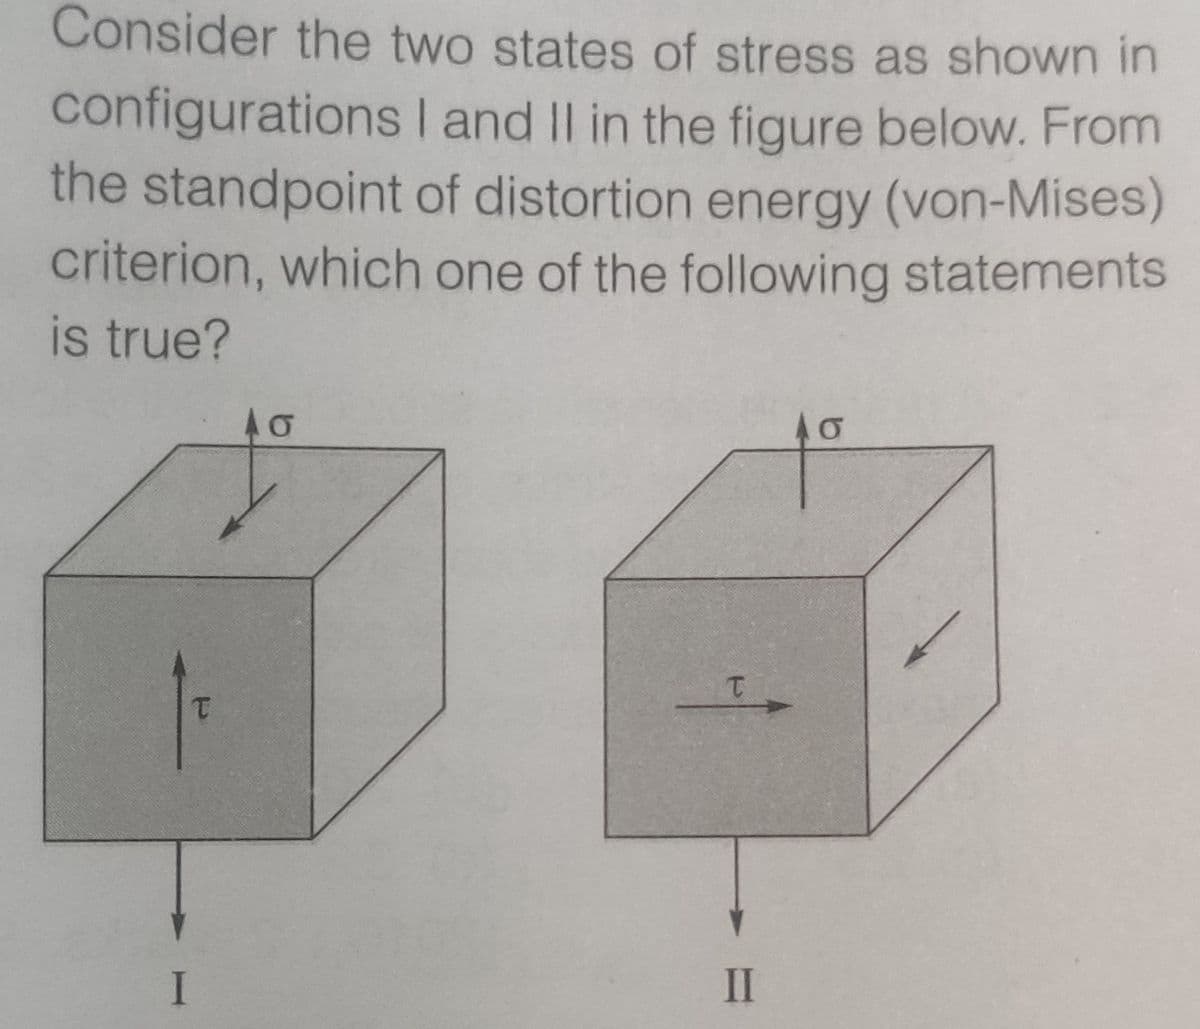 Consider the two states of stress as shown in
configurations I and Il in the figure below. From
the standpoint of distortion energy (von-Mises)
criterion, which one of the following statements
is true?
II
